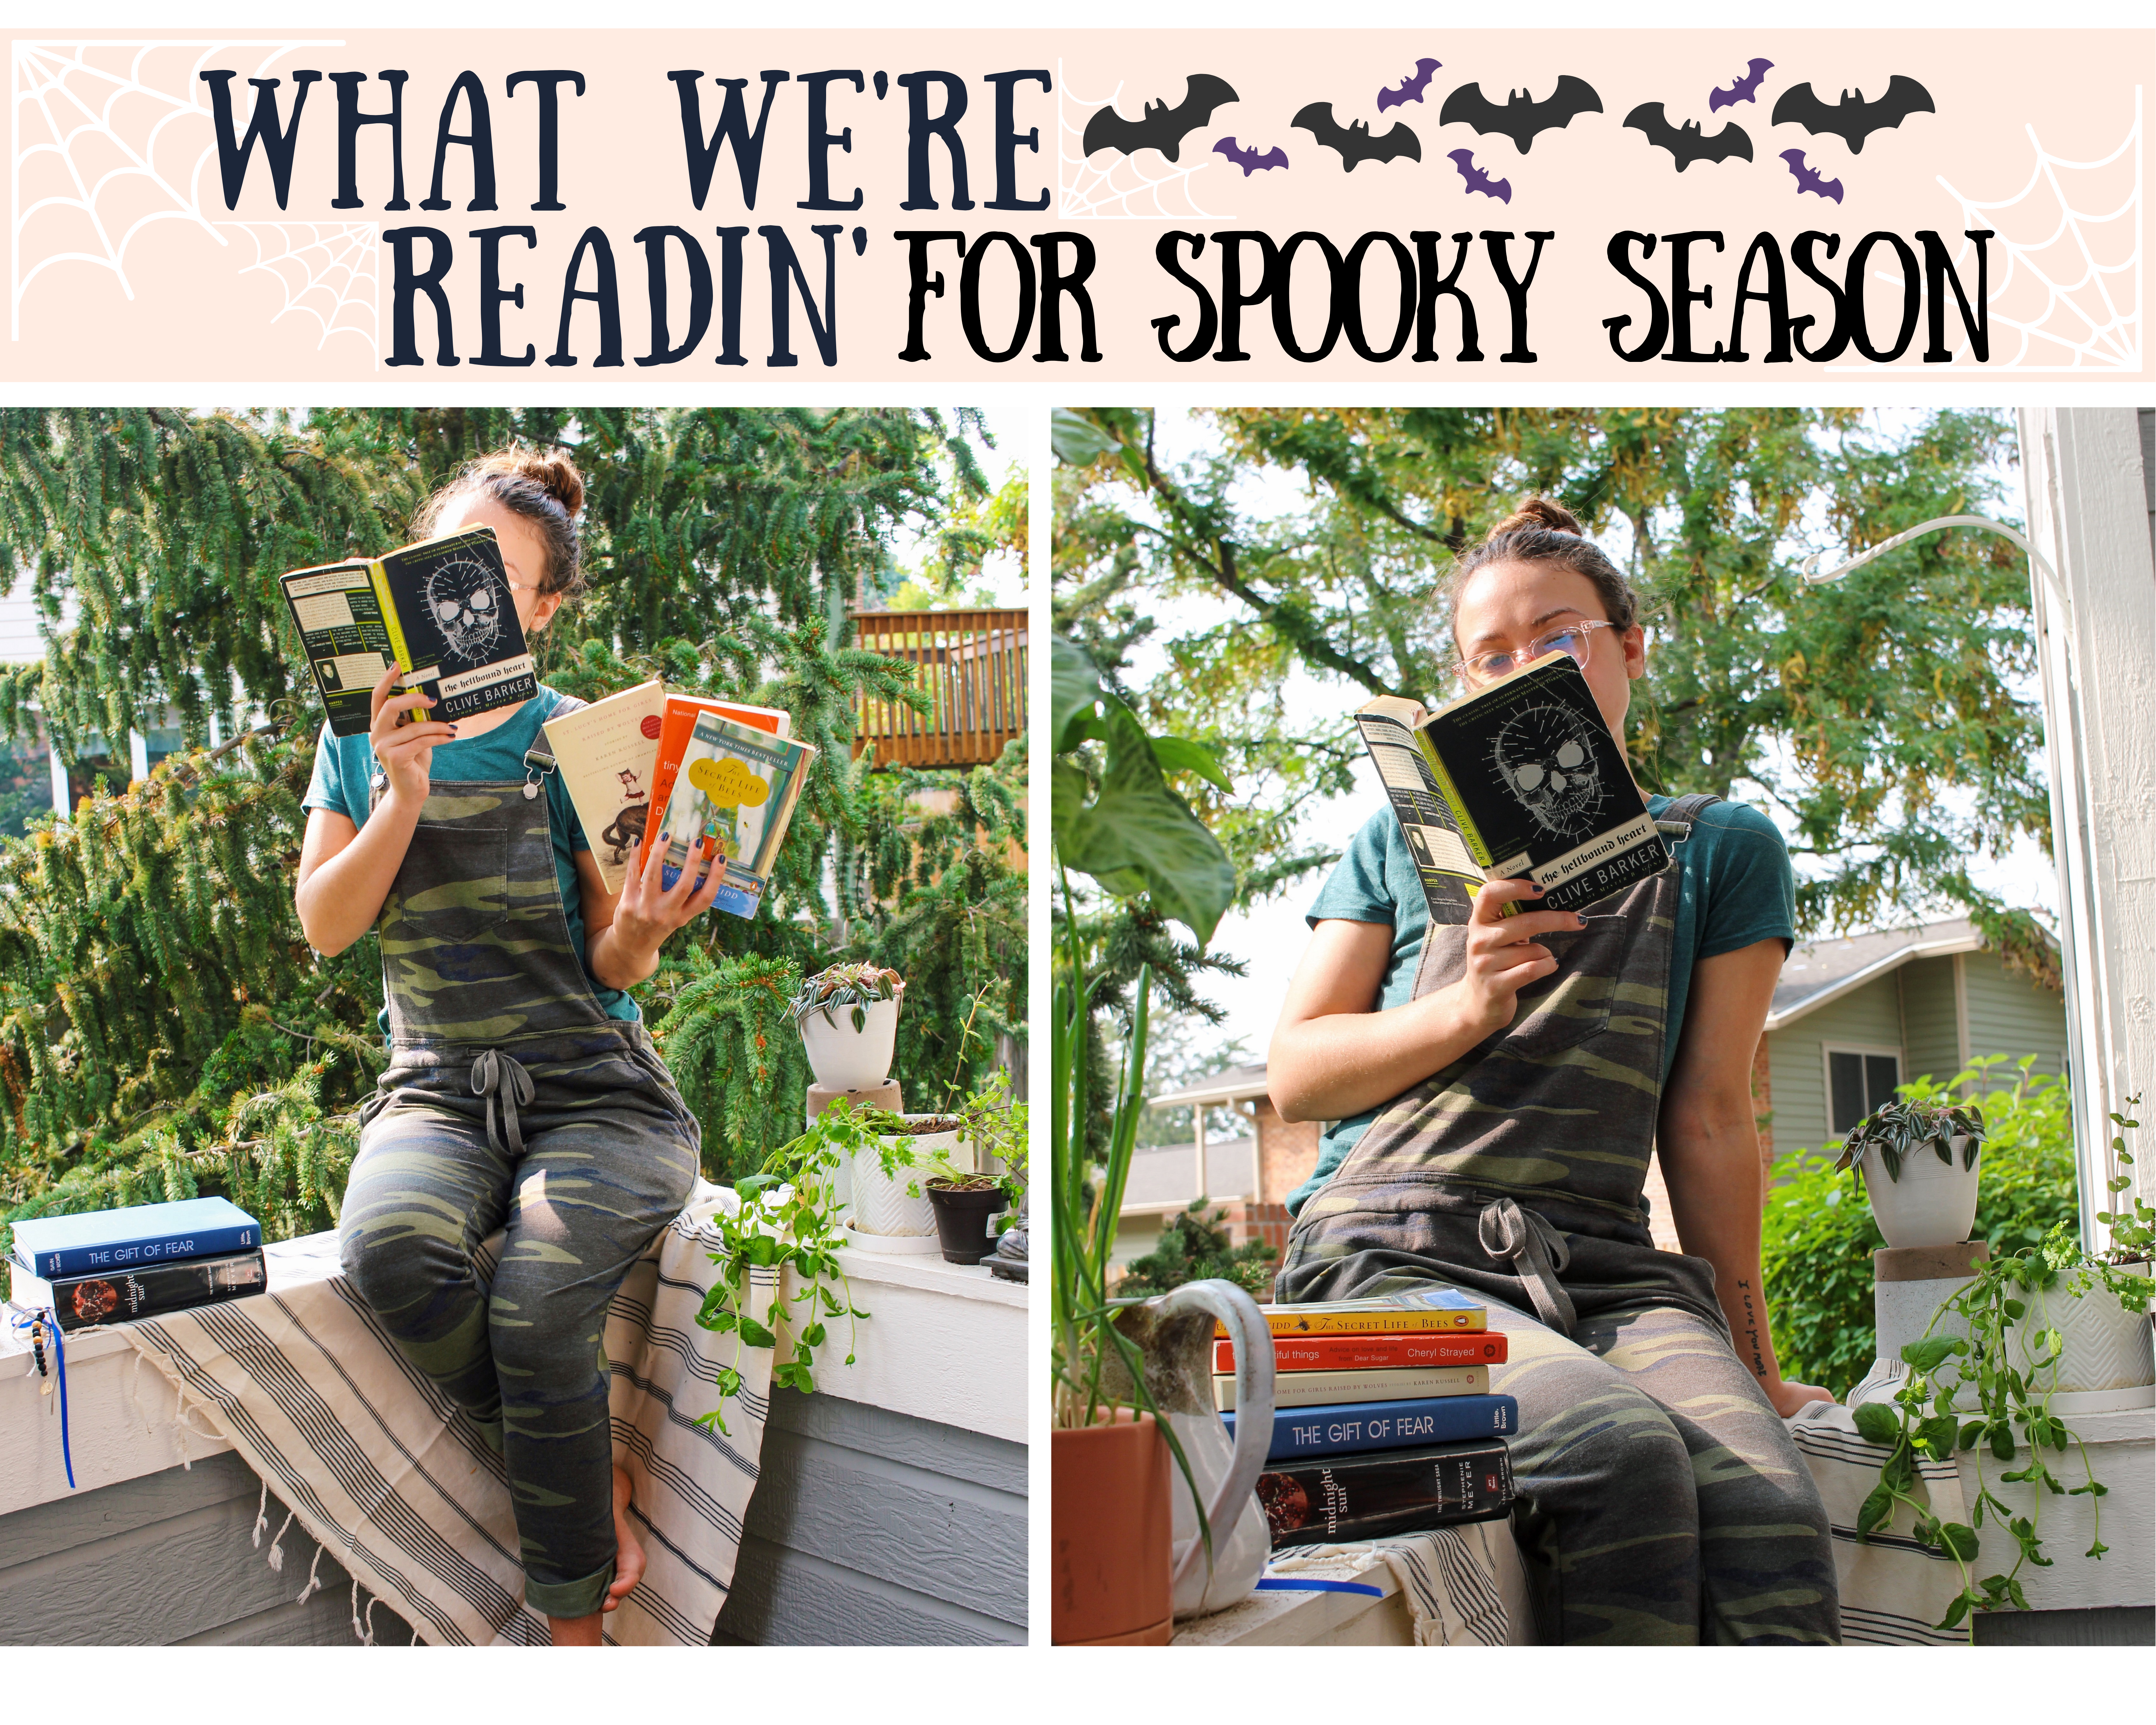 Here’s What We’re Readin’ for Spooky Season